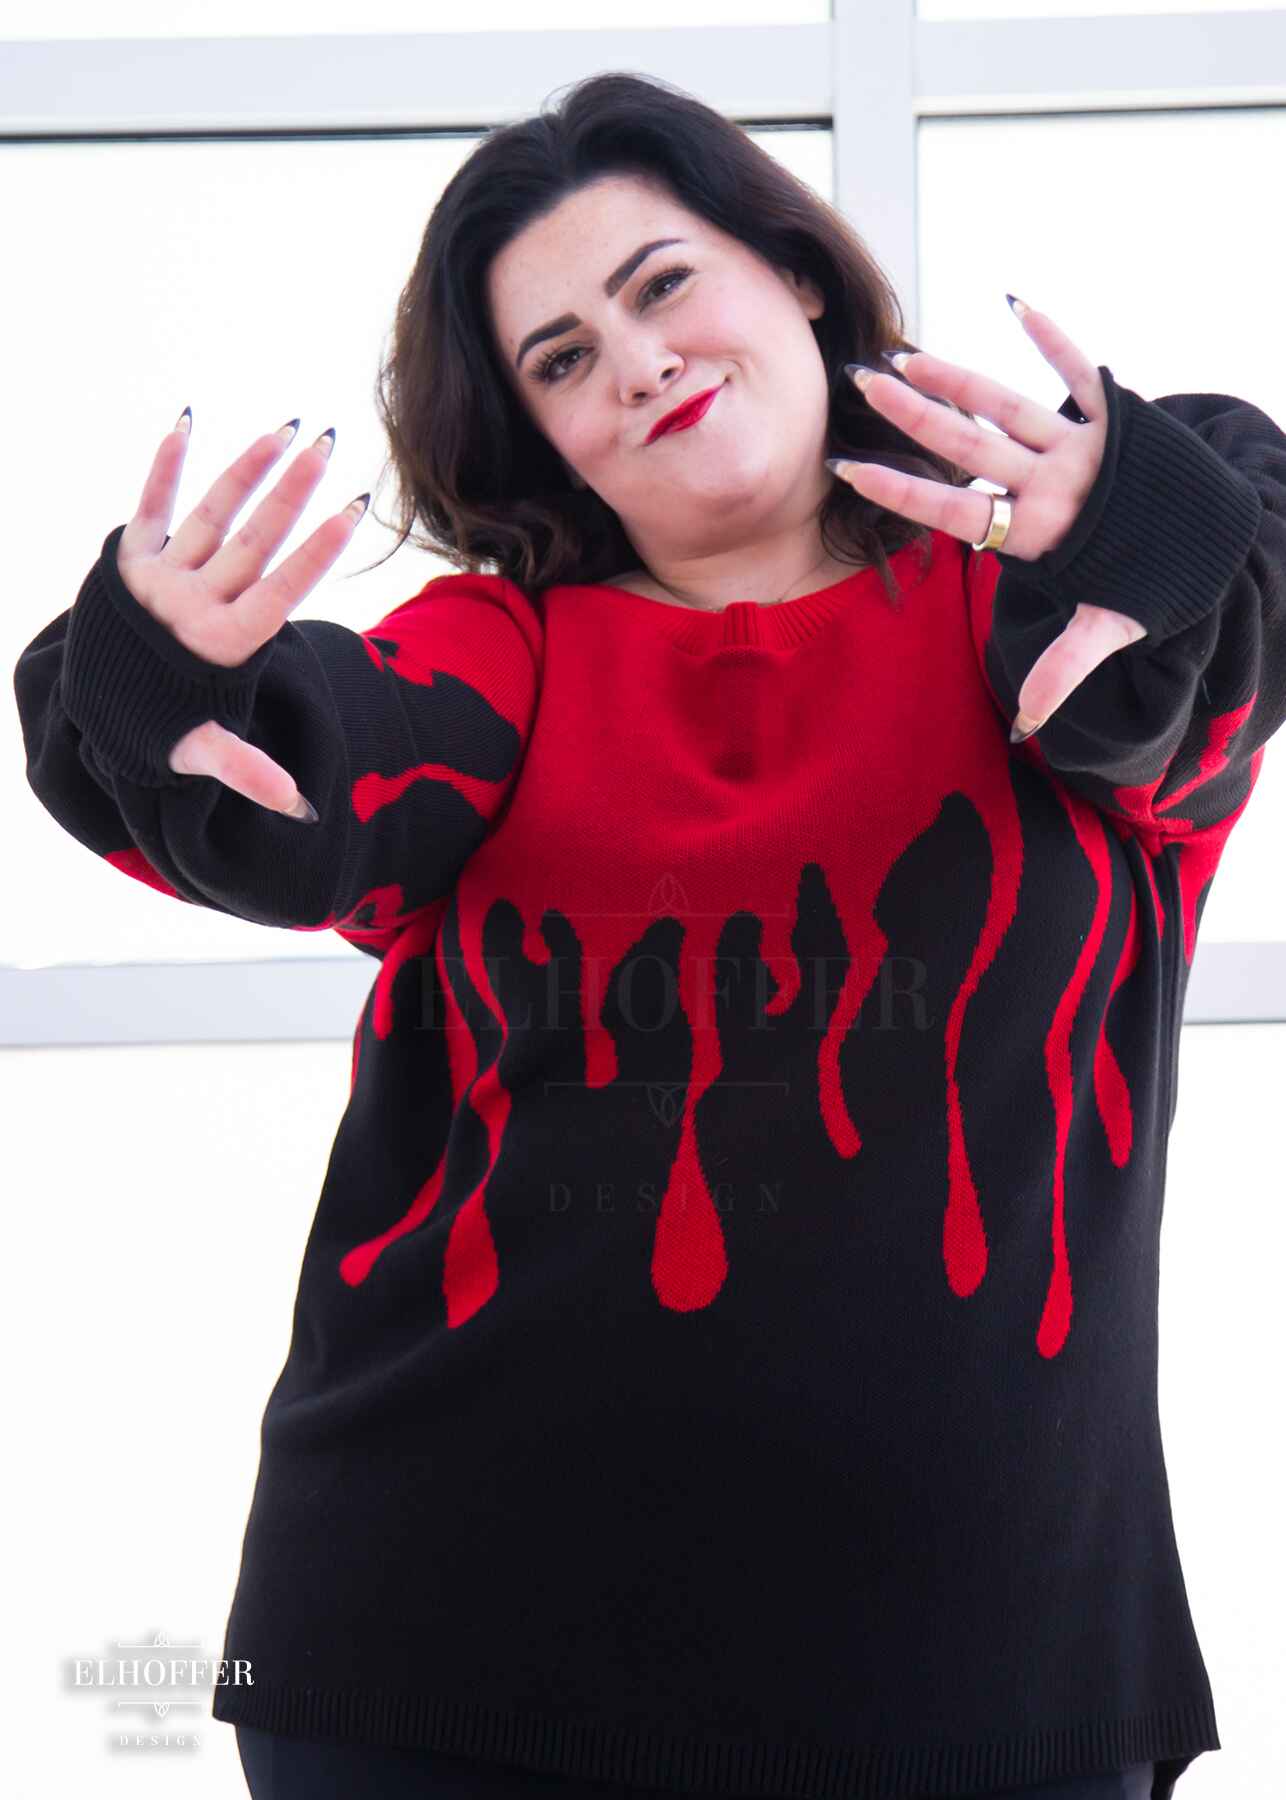 Stacy, a fair skinned XL model with shoulder length wavy dark brown hair, is smirking while holding her hands towards the camera to show off the thumbholes of the oversize sweater she is wearing that has a bright red blood drip design that looks like it's oozing down onto a black sweater with long billowing sleeves